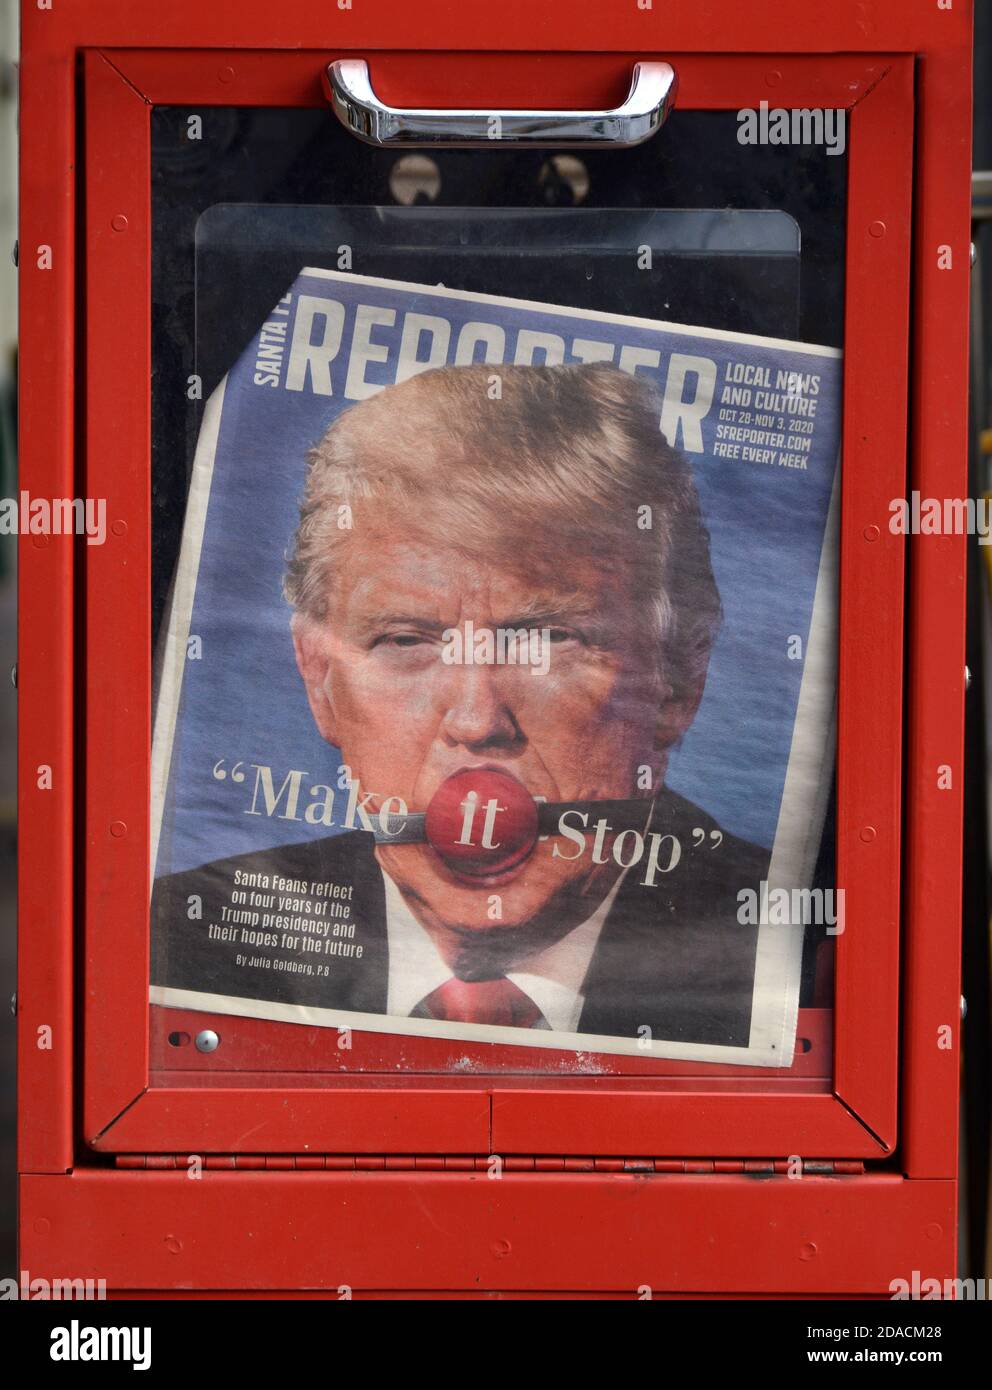 A free weekly tabloid newspaper distributed in Santa Fe, New Mexico, features a critical cover story on U.S. President Donald Trump. Stock Photo